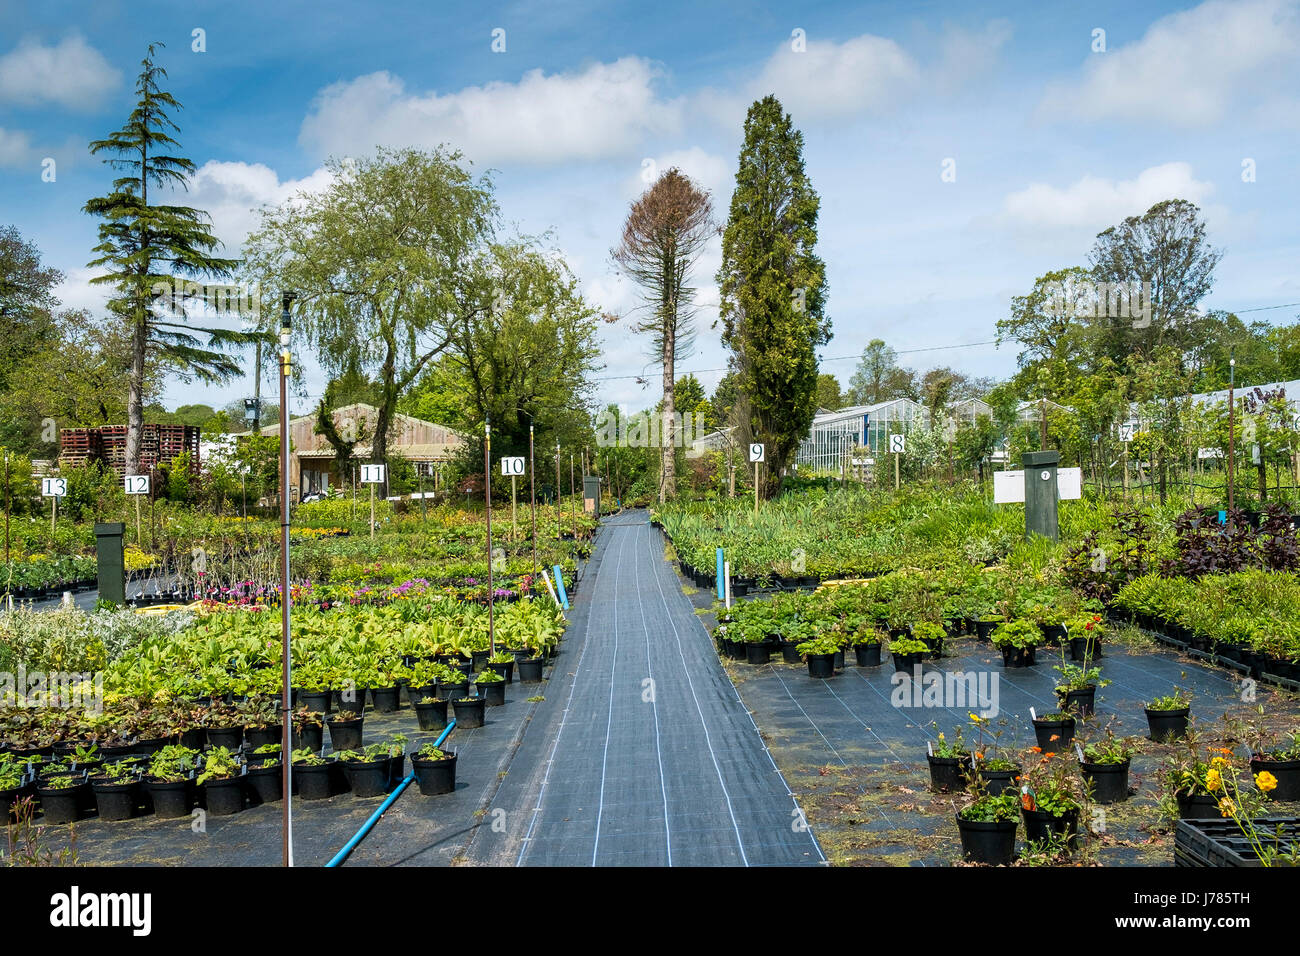 Plants on sale at a garden centre or Plant nursery. Stock Photo